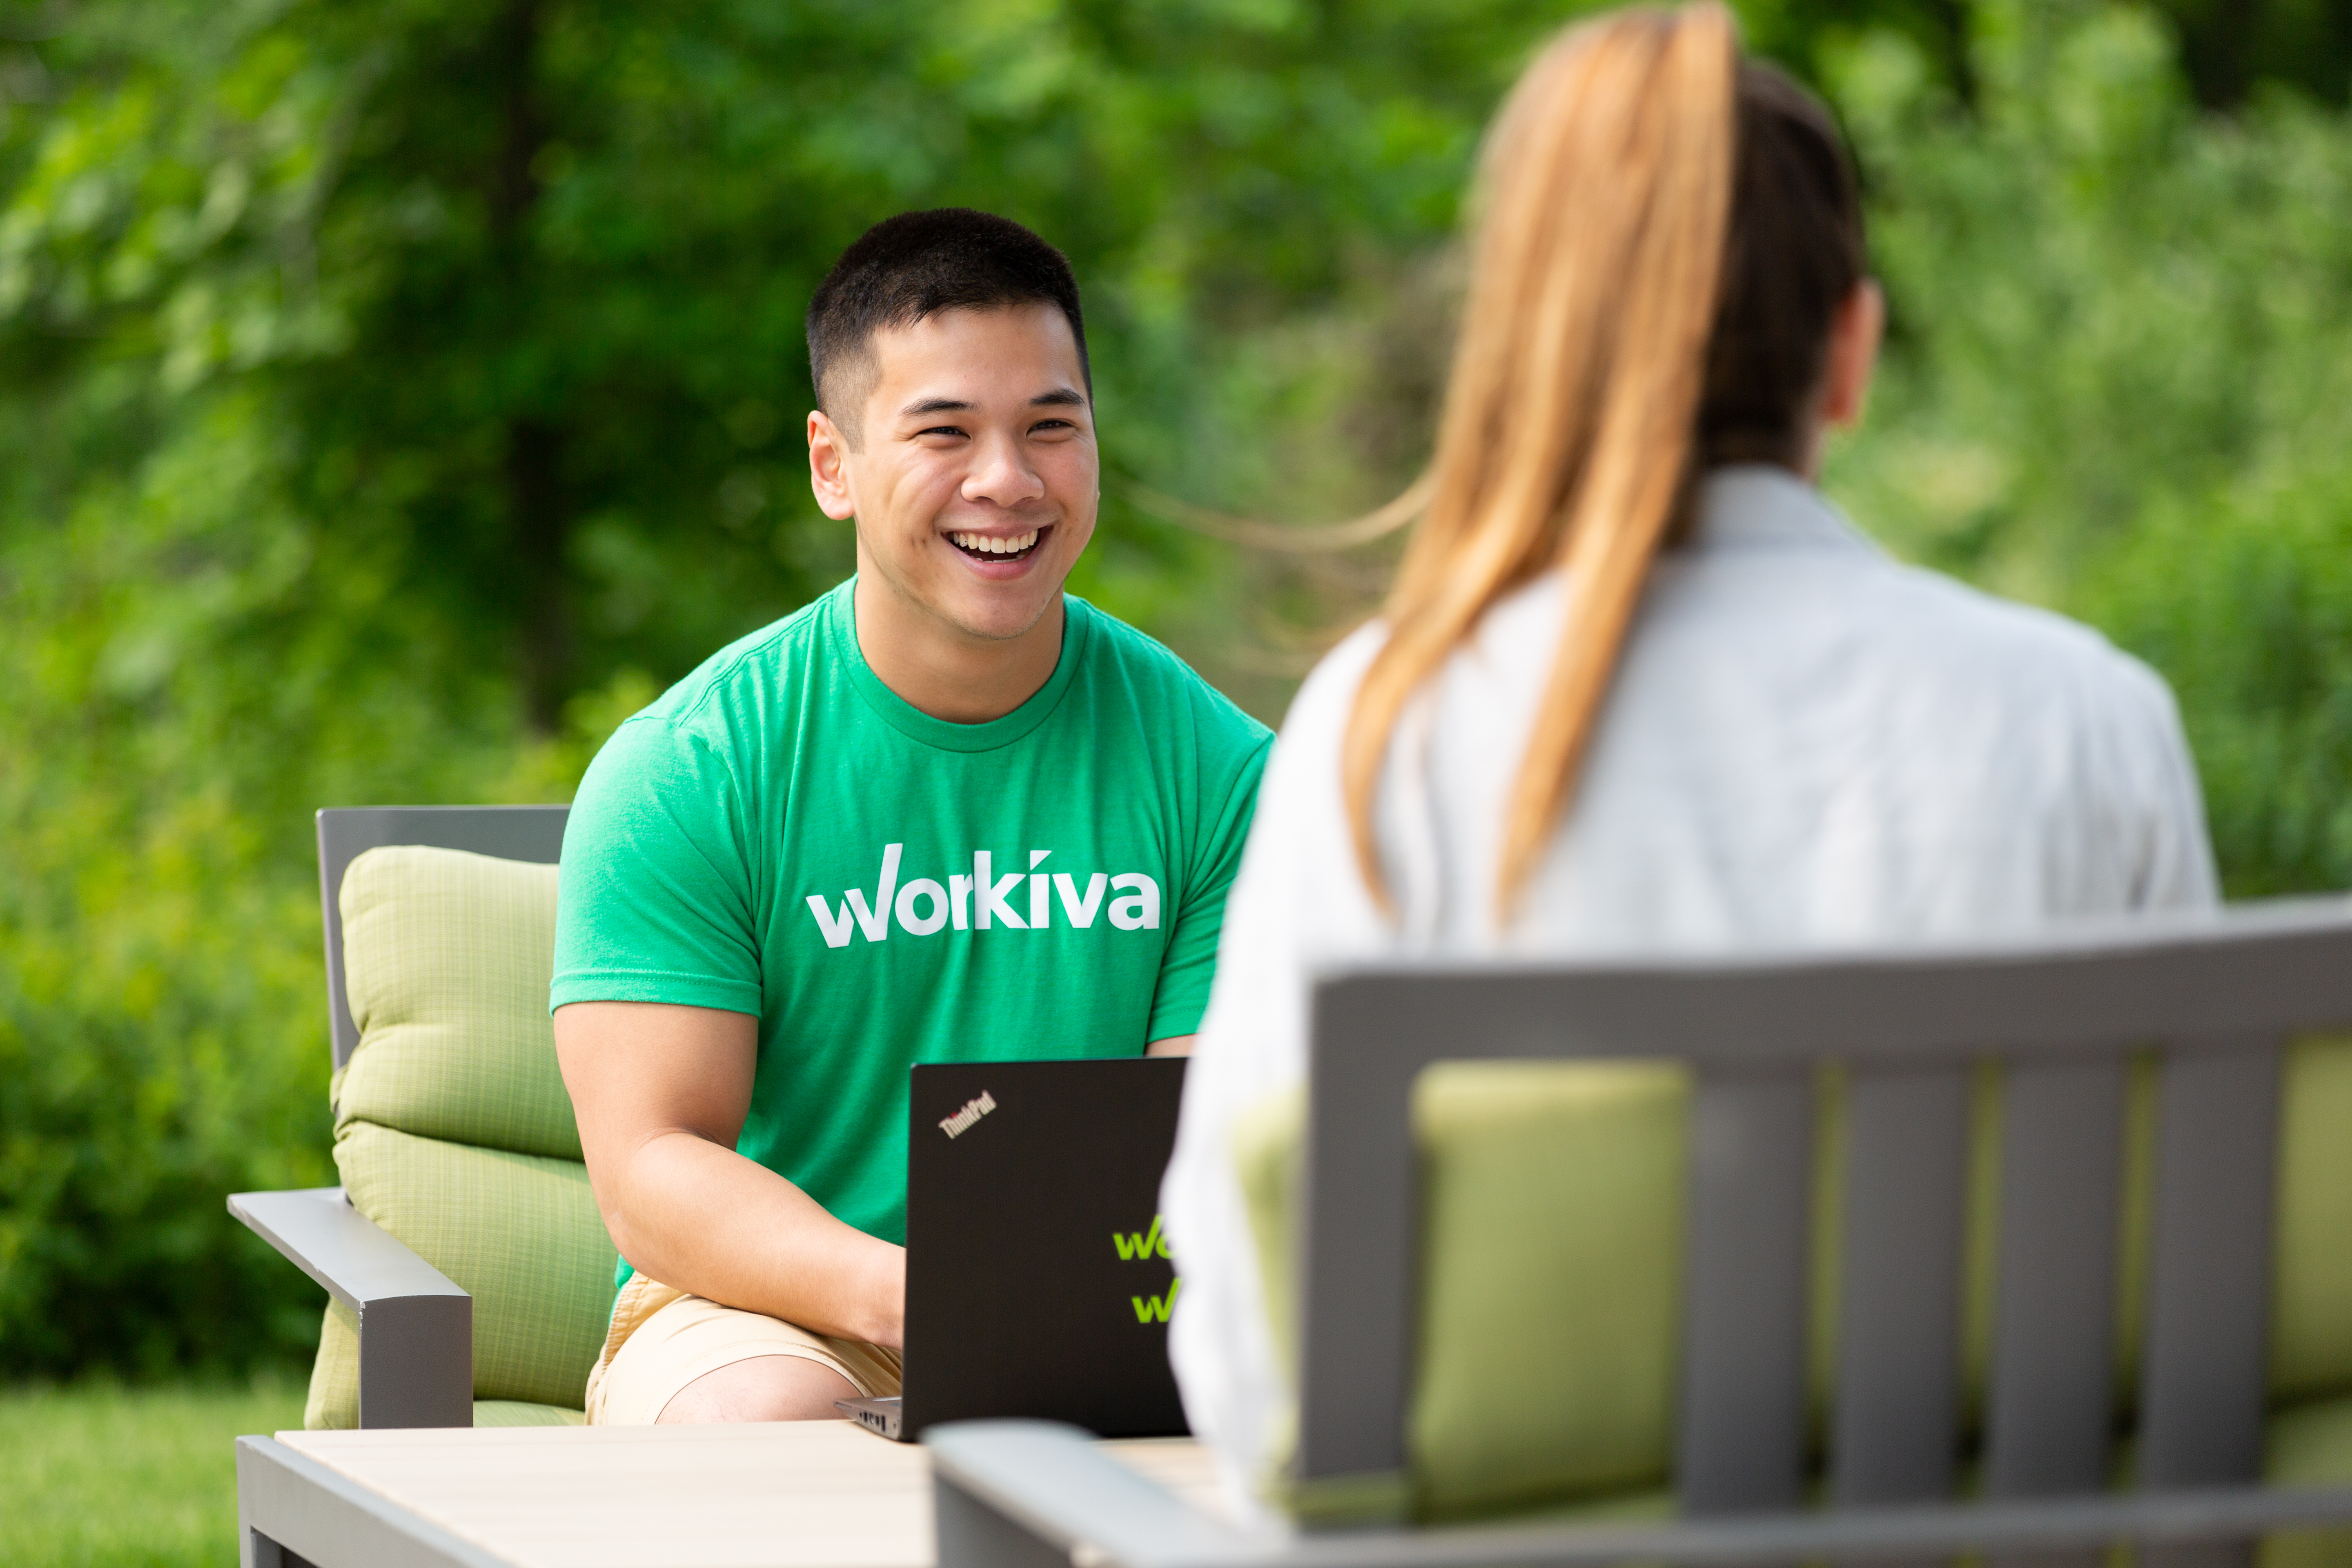 Workiva team members working together in an outdoor space